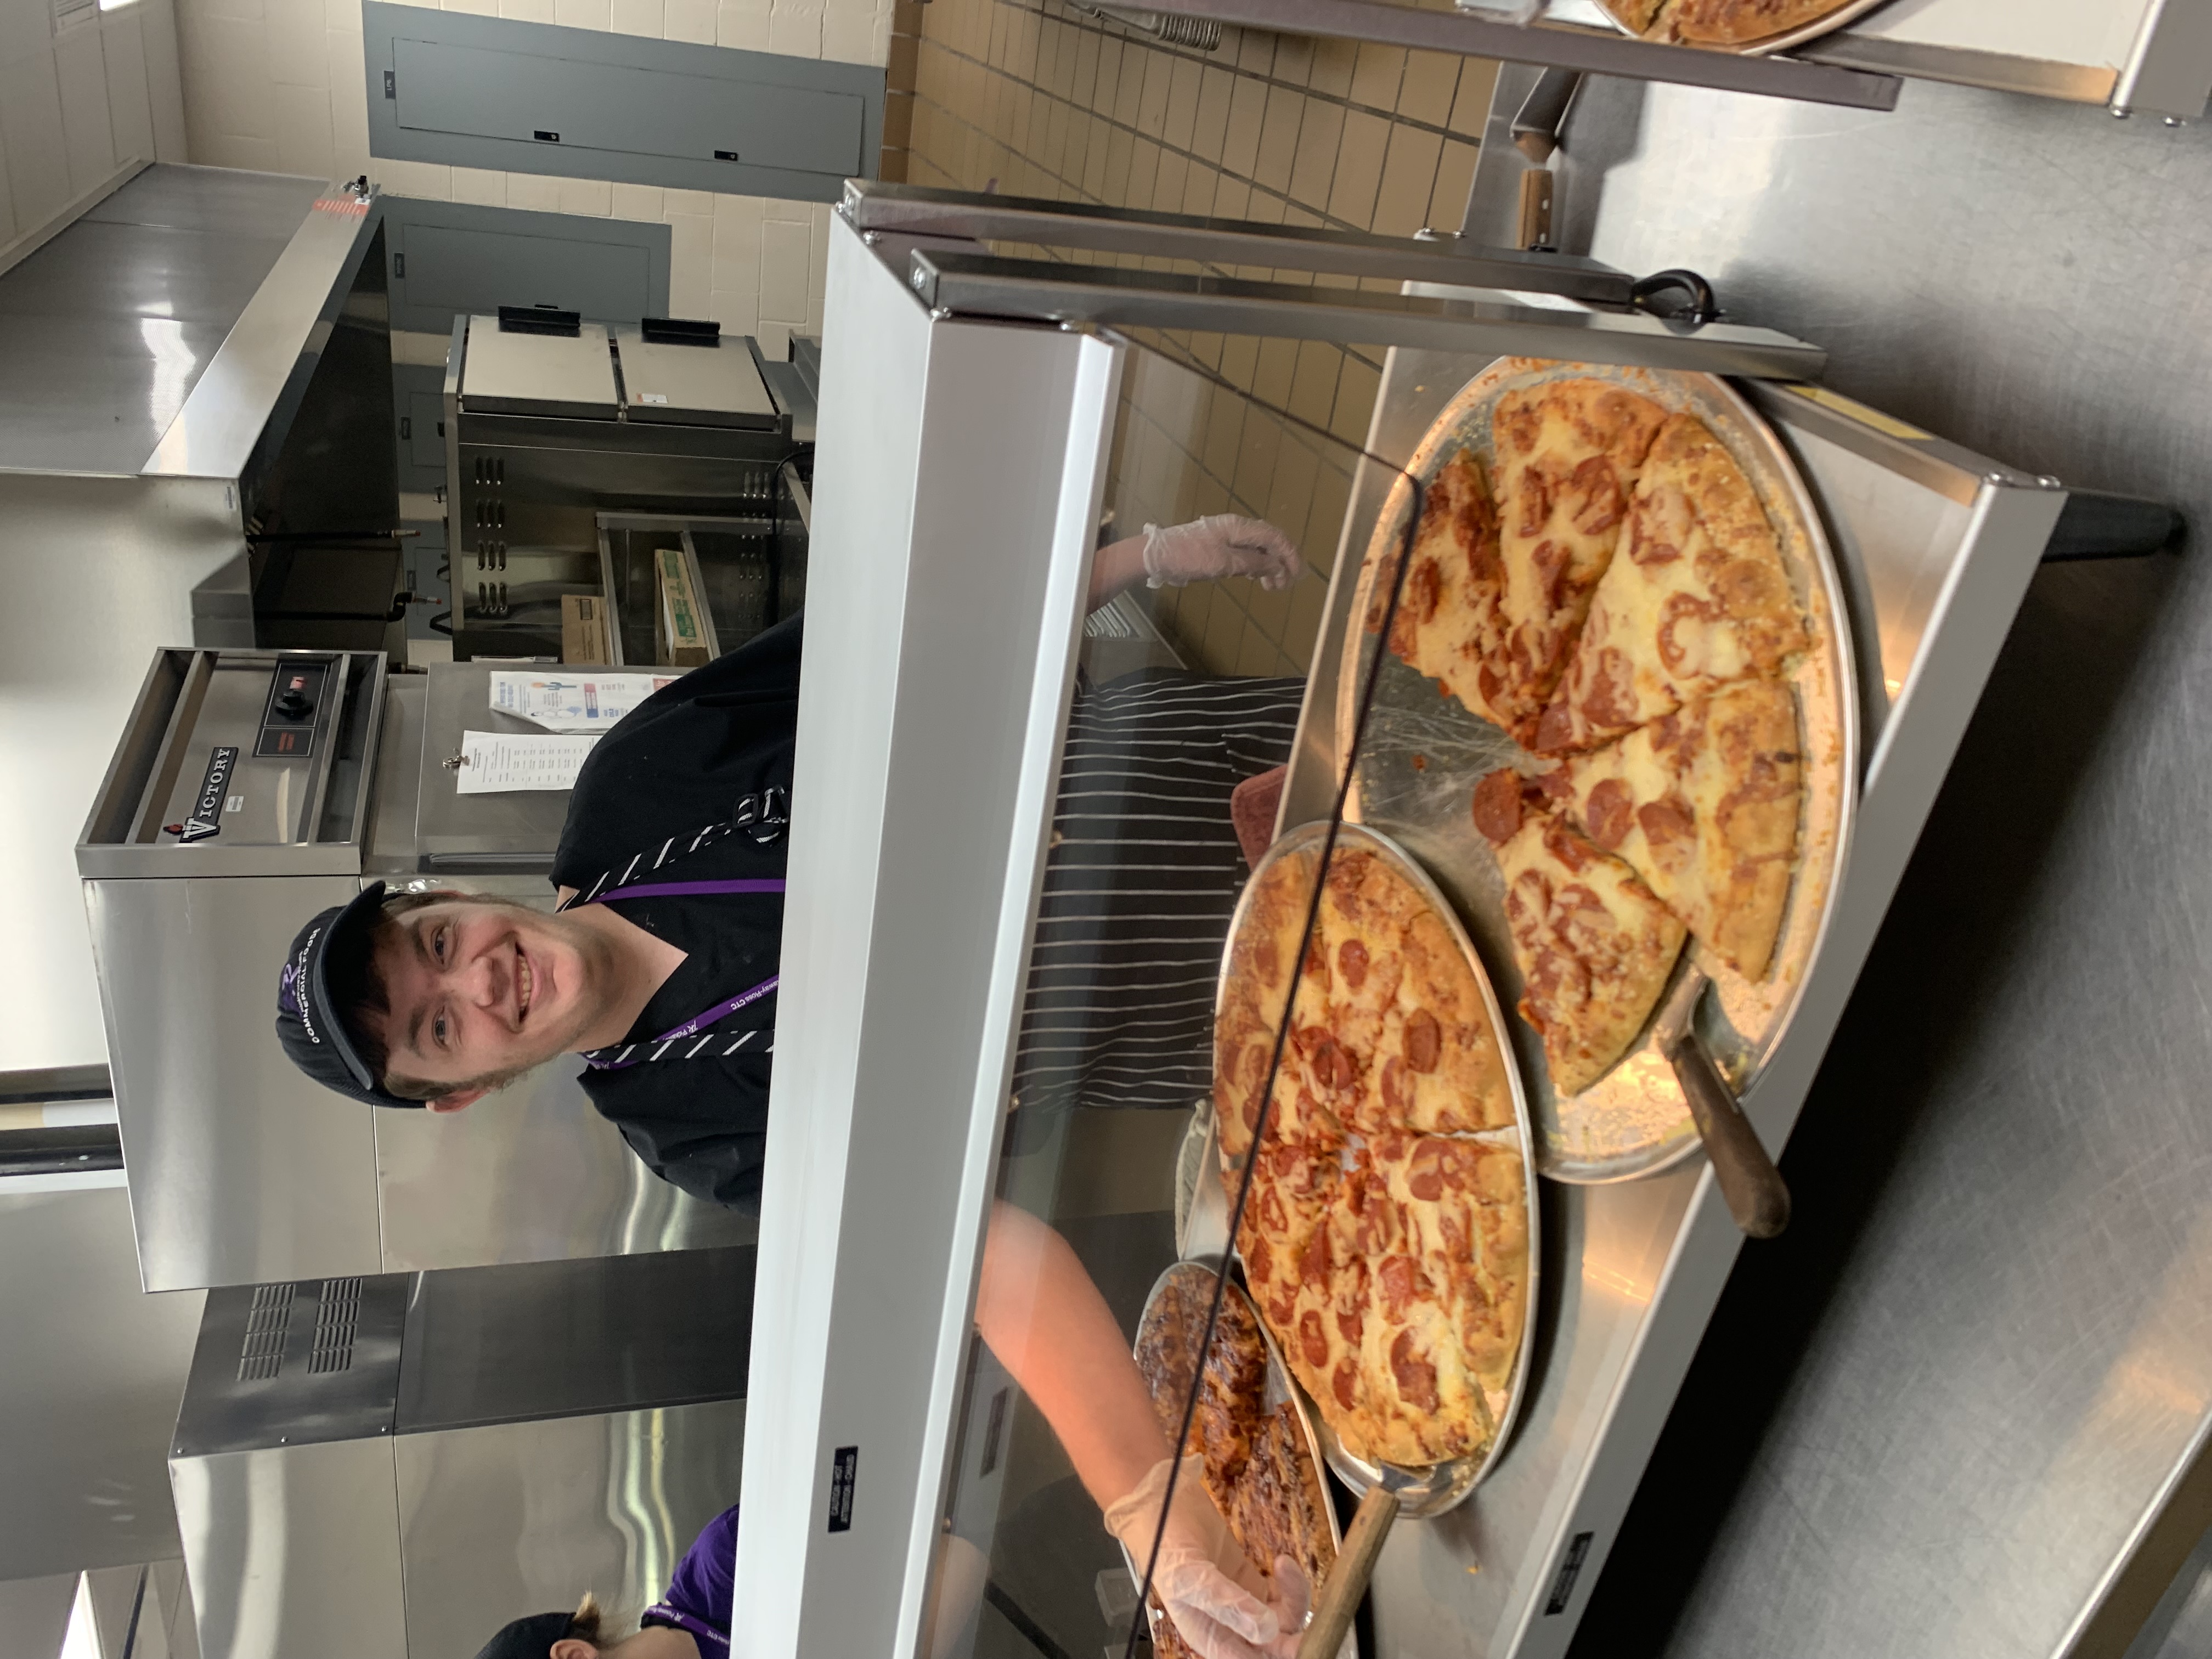 William Fuller works the pizza line at school.